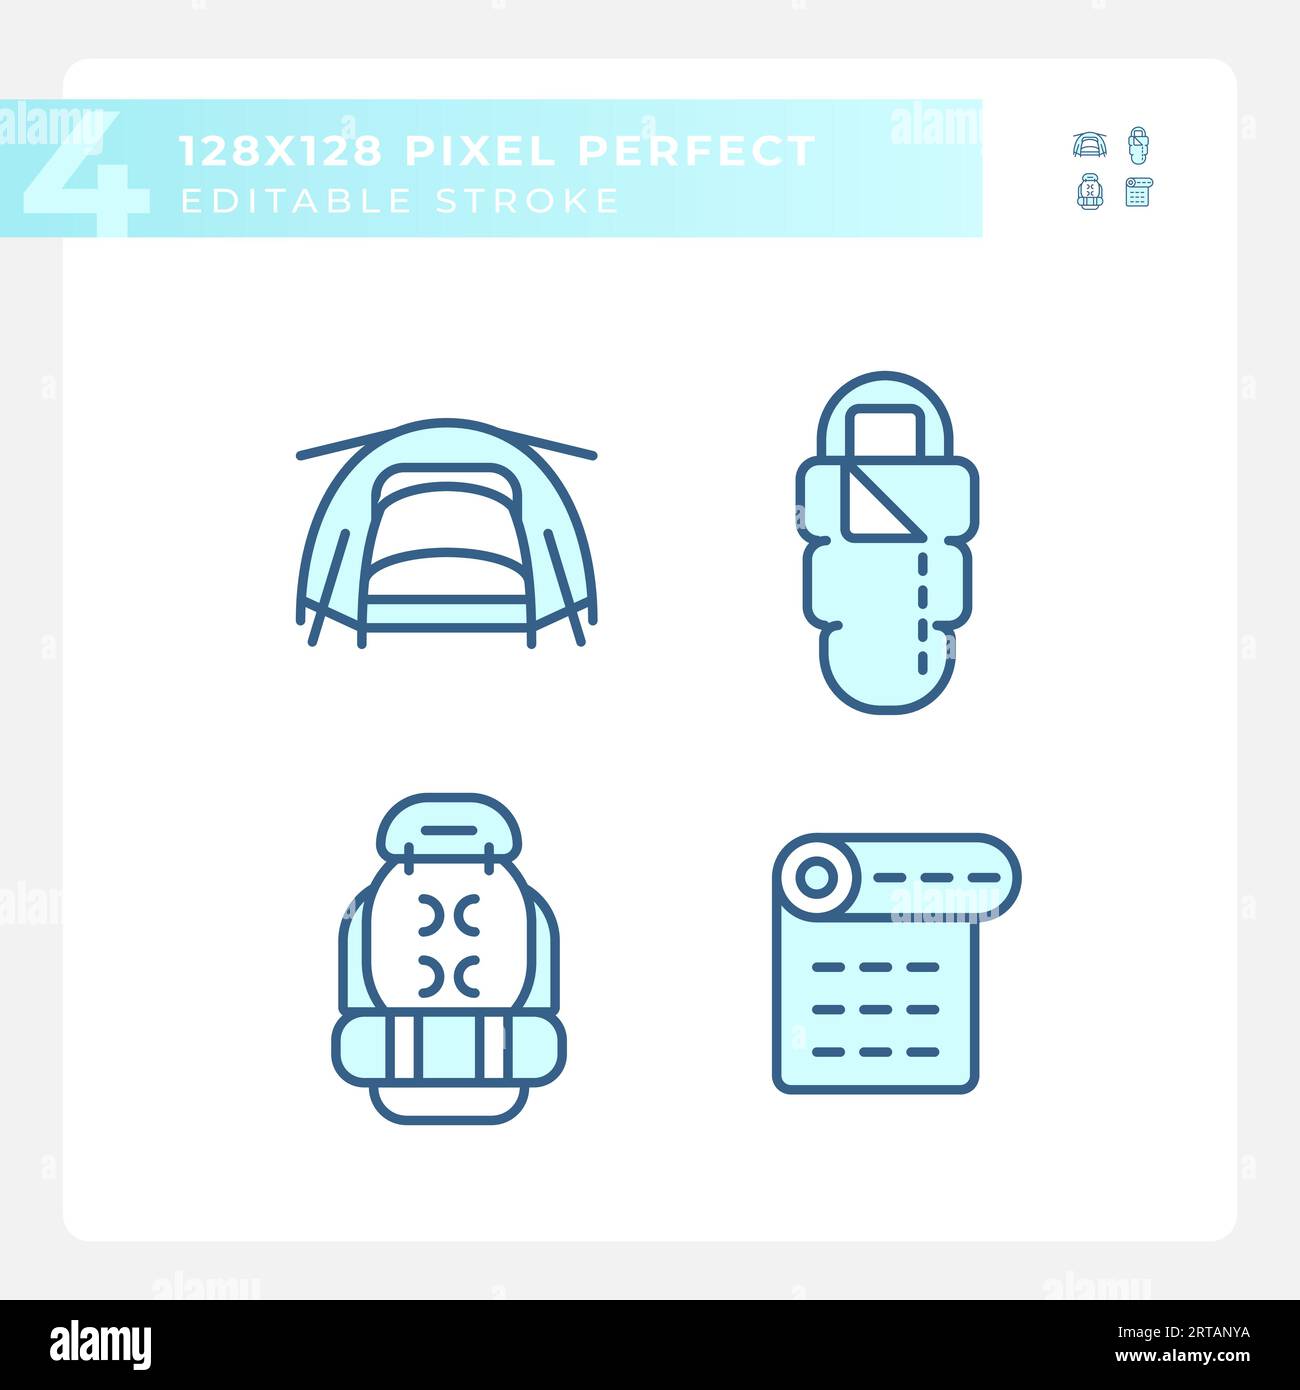 2D editable pixel perfect hiking gear line icons Stock Vector